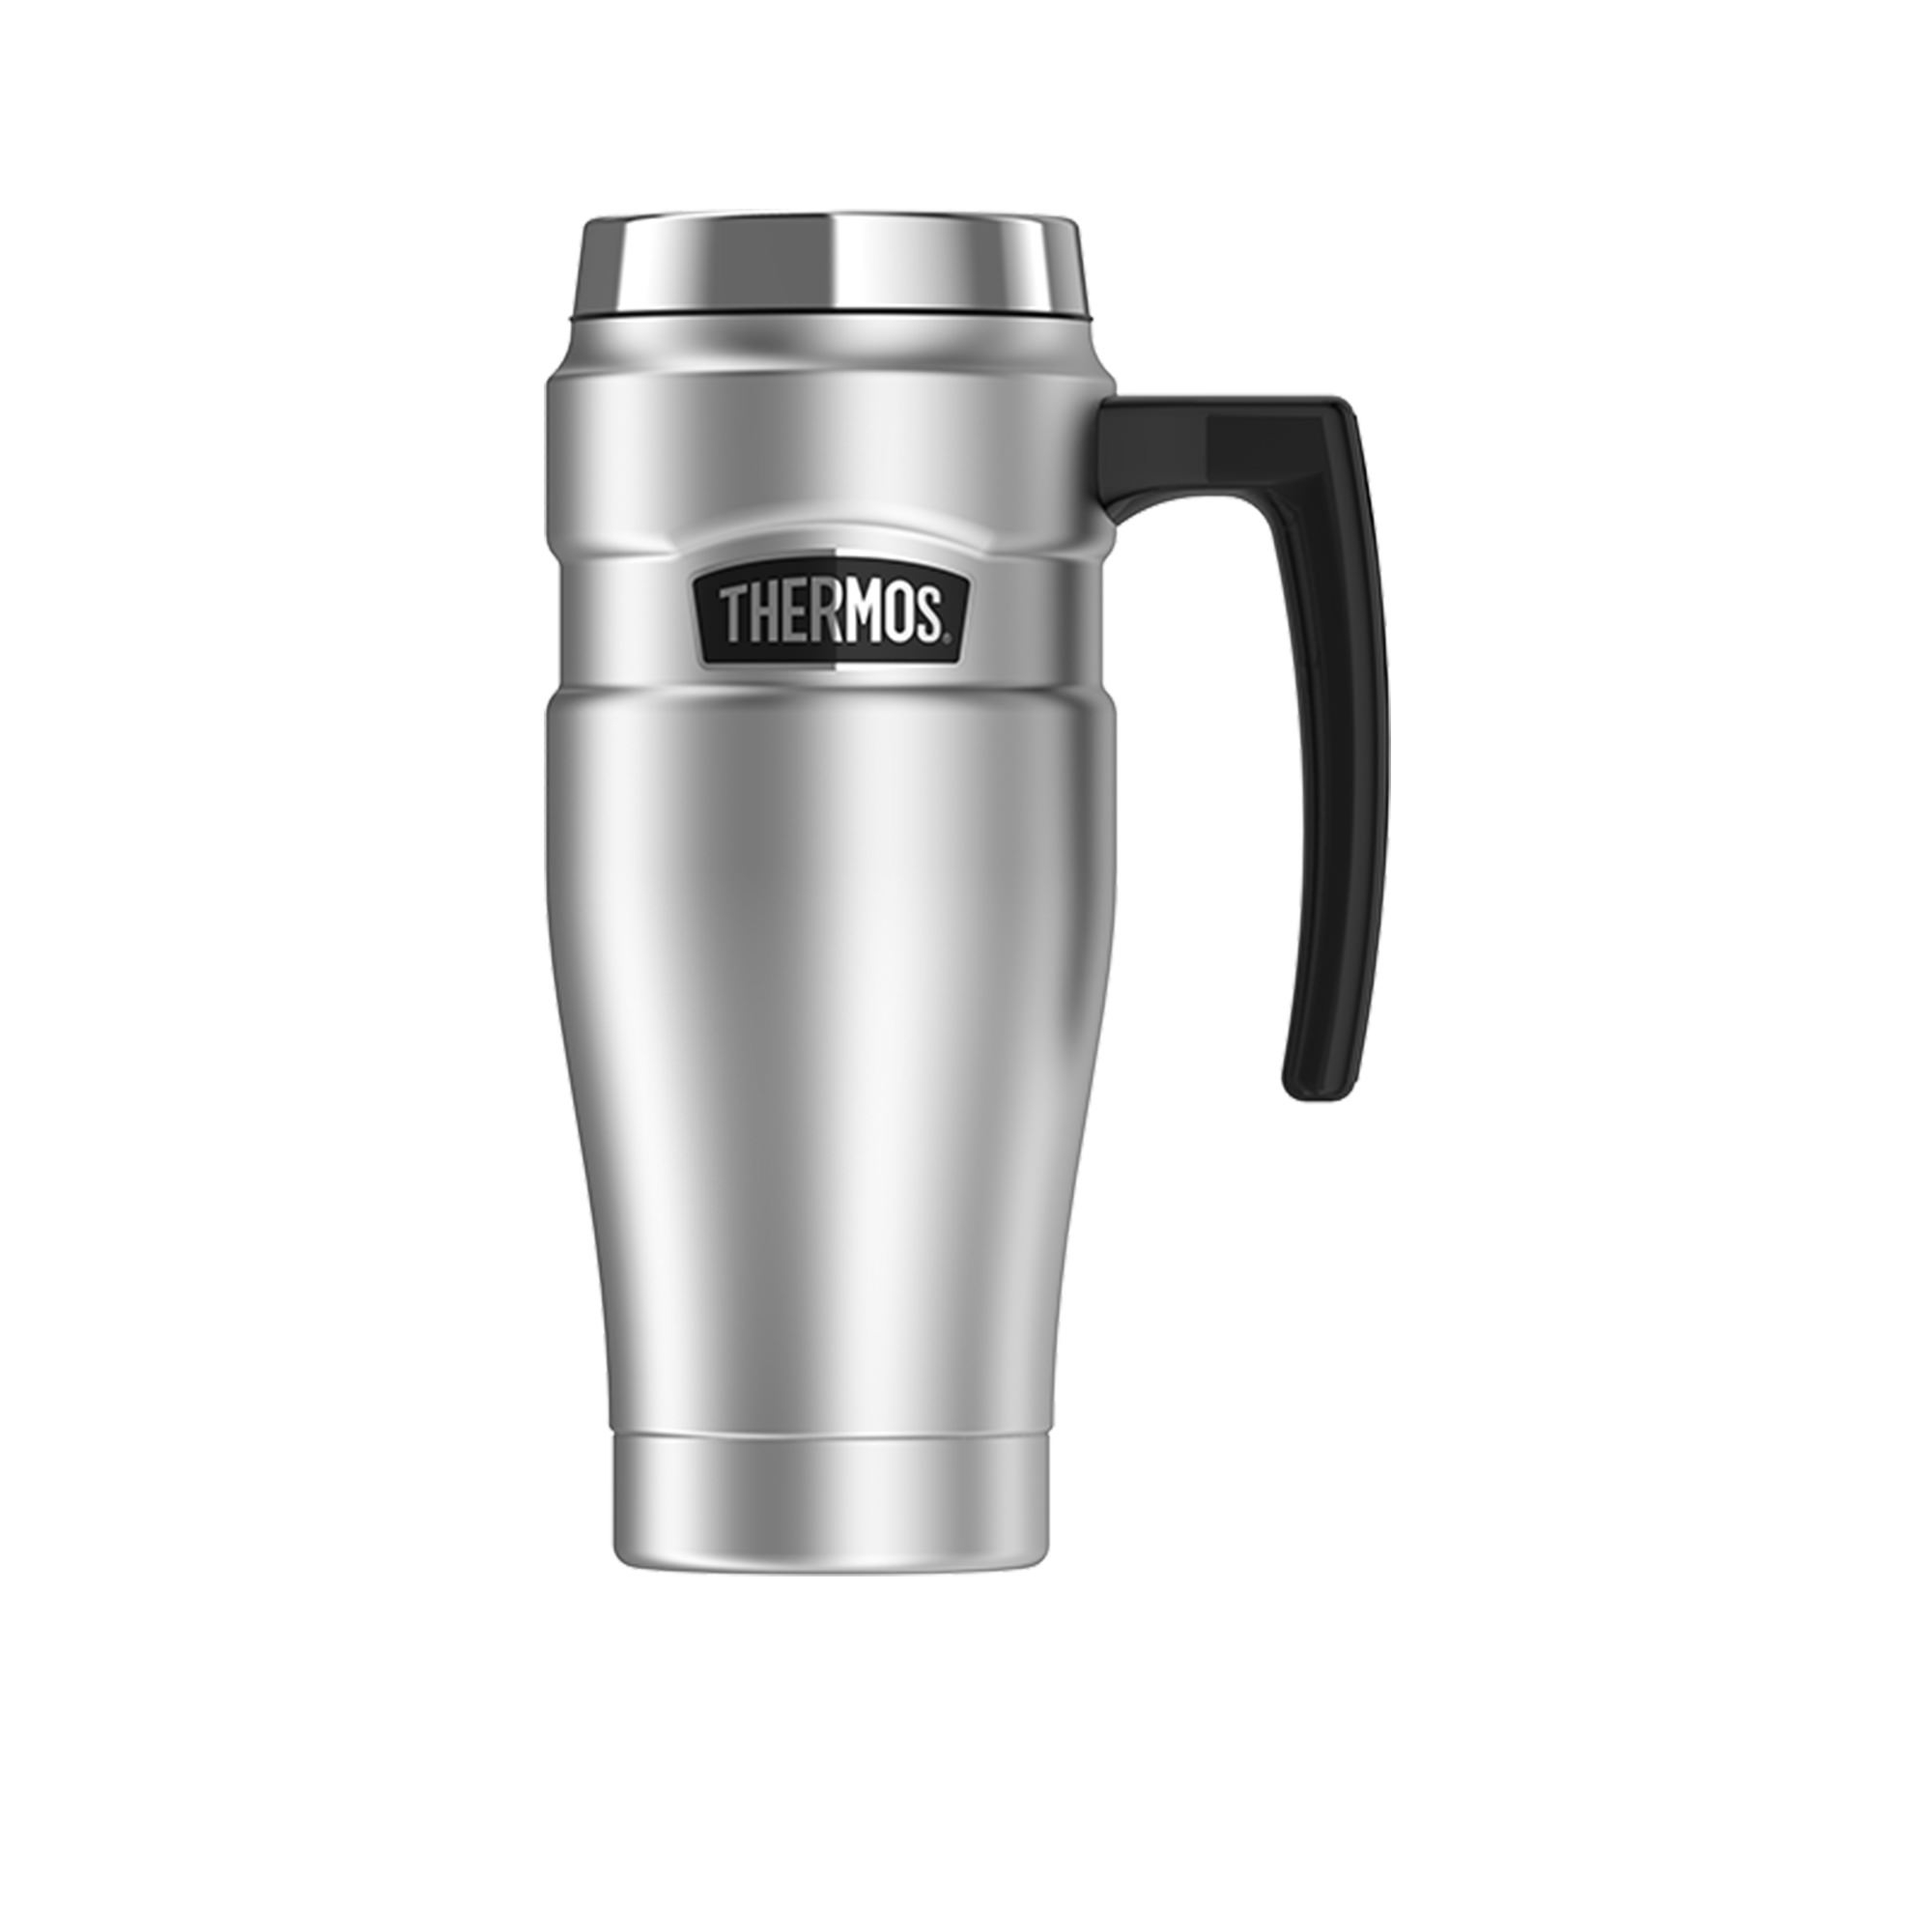 Thermos Stainless King Insulated Travel Mug 470ml Stainless Steel Image 1